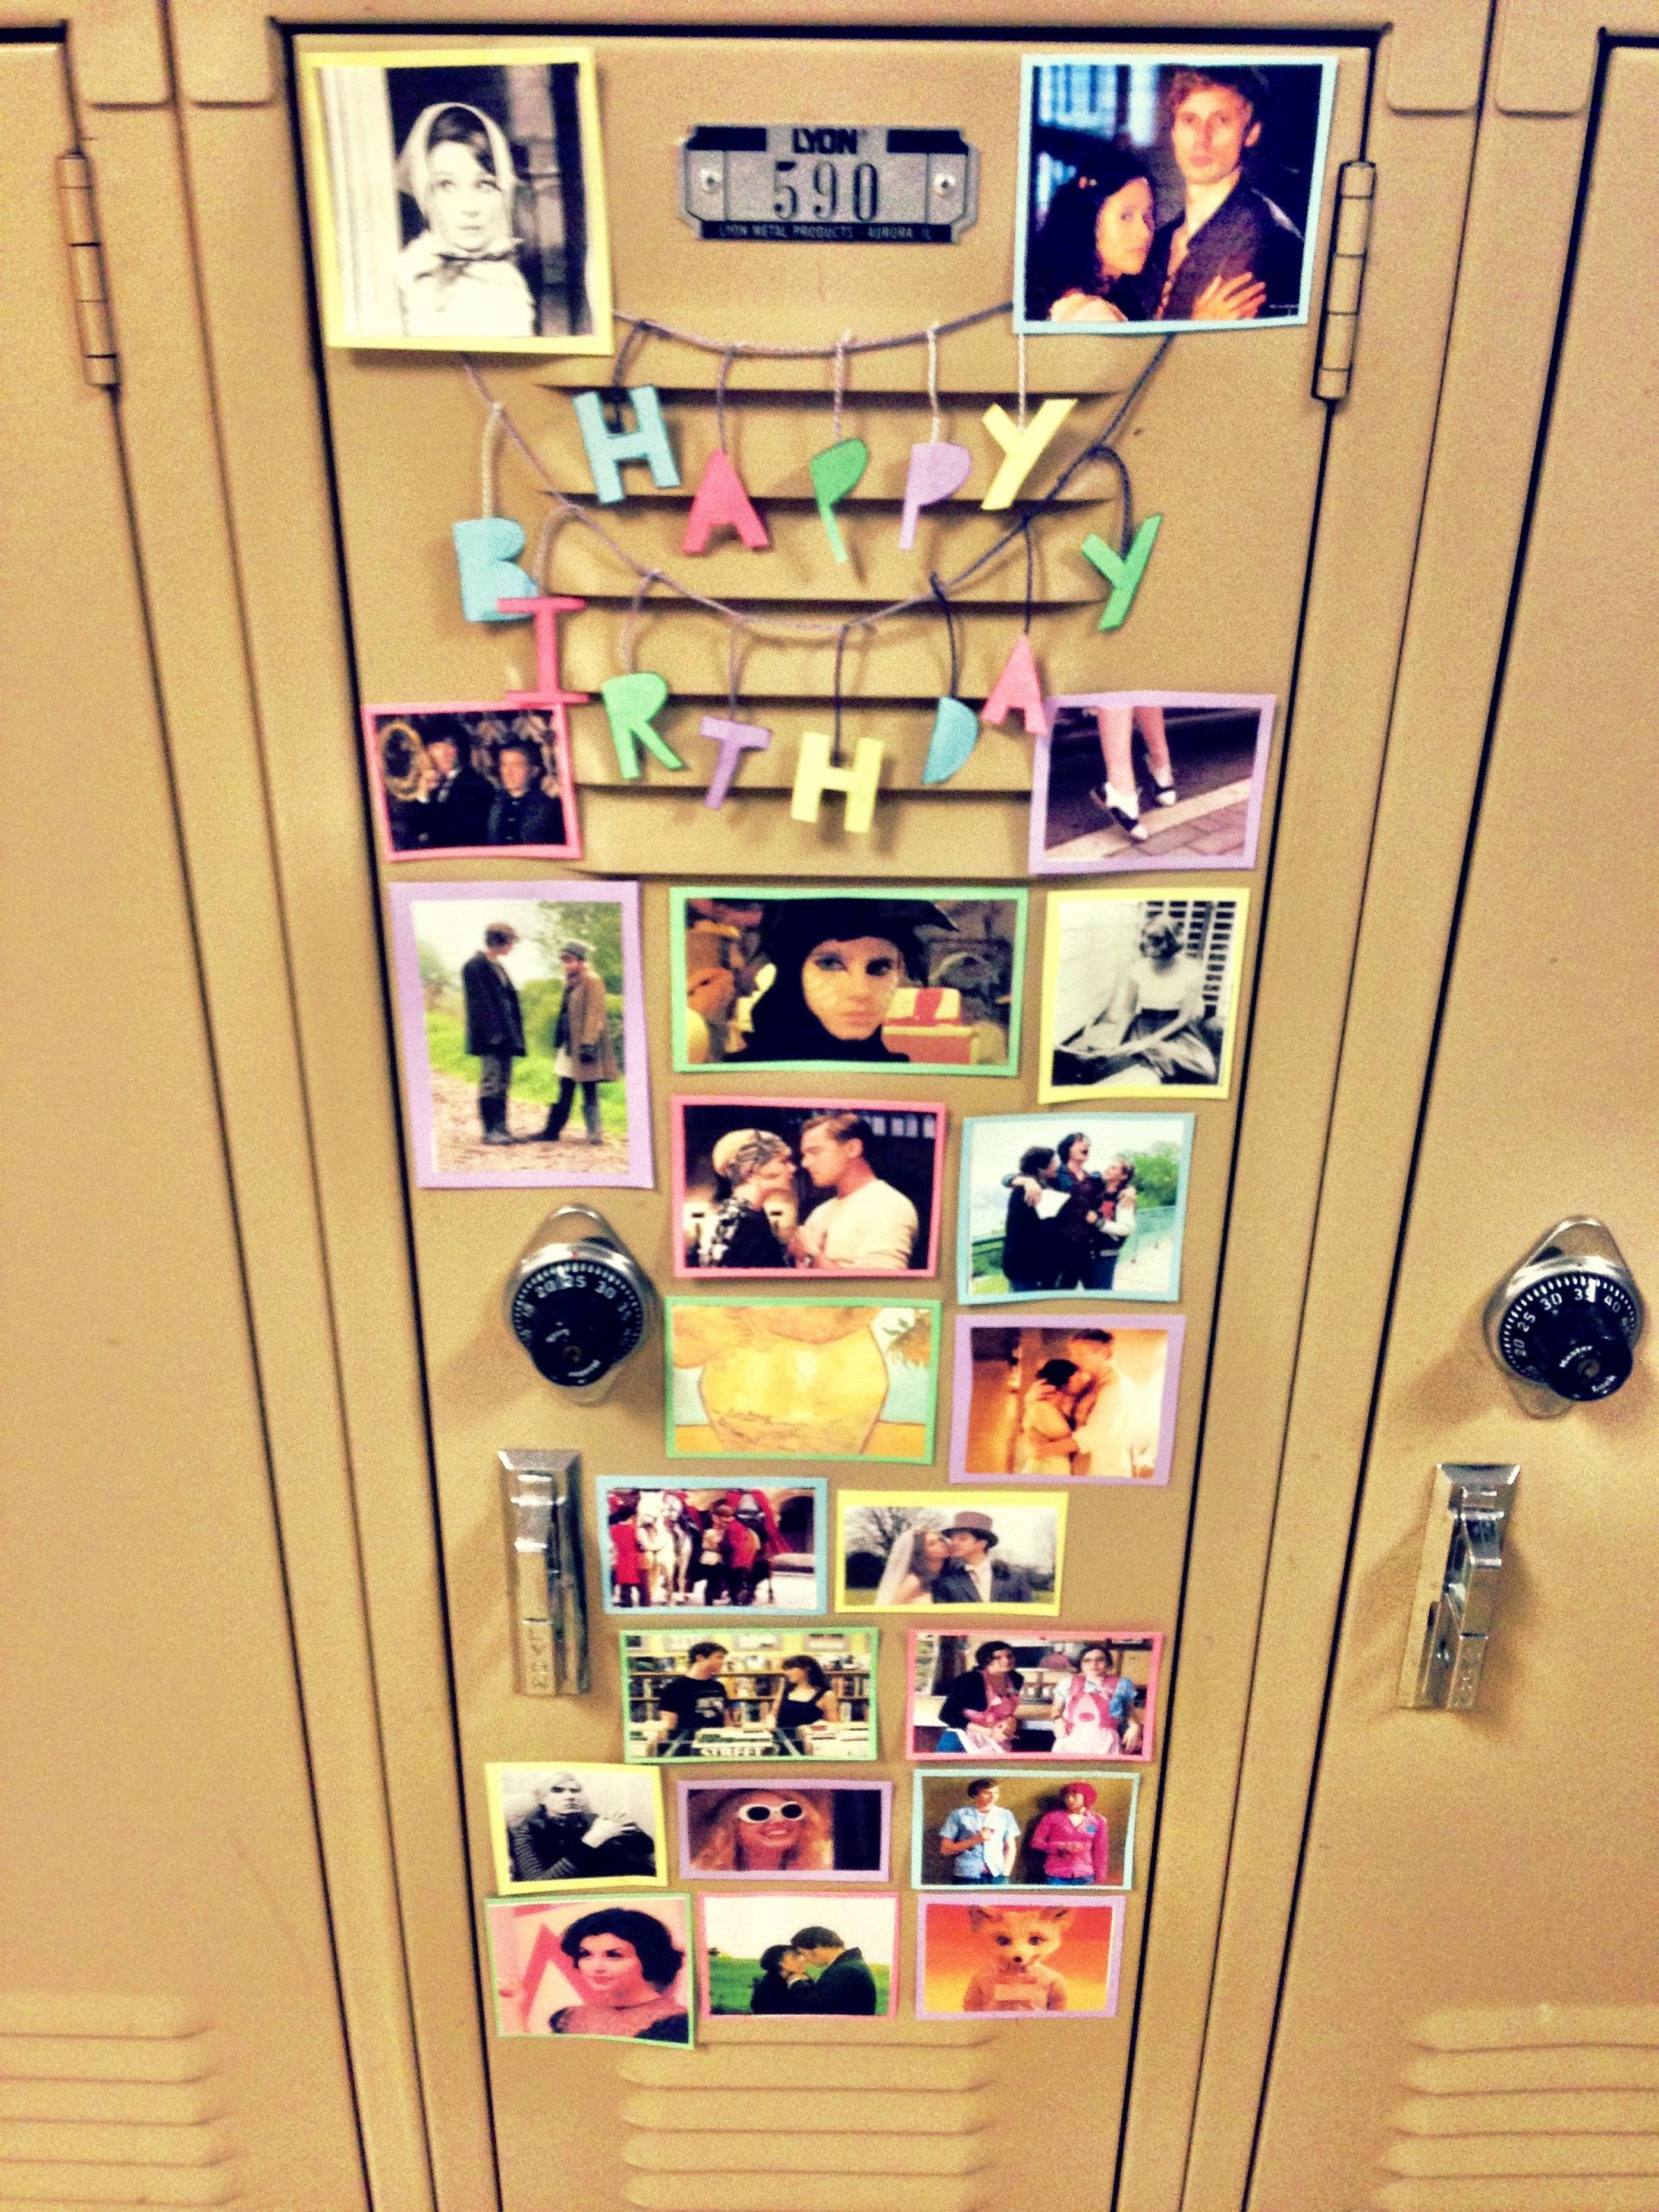 Decorated Lockers For Birthdays
 My favorite birthday t a decorated locker from my